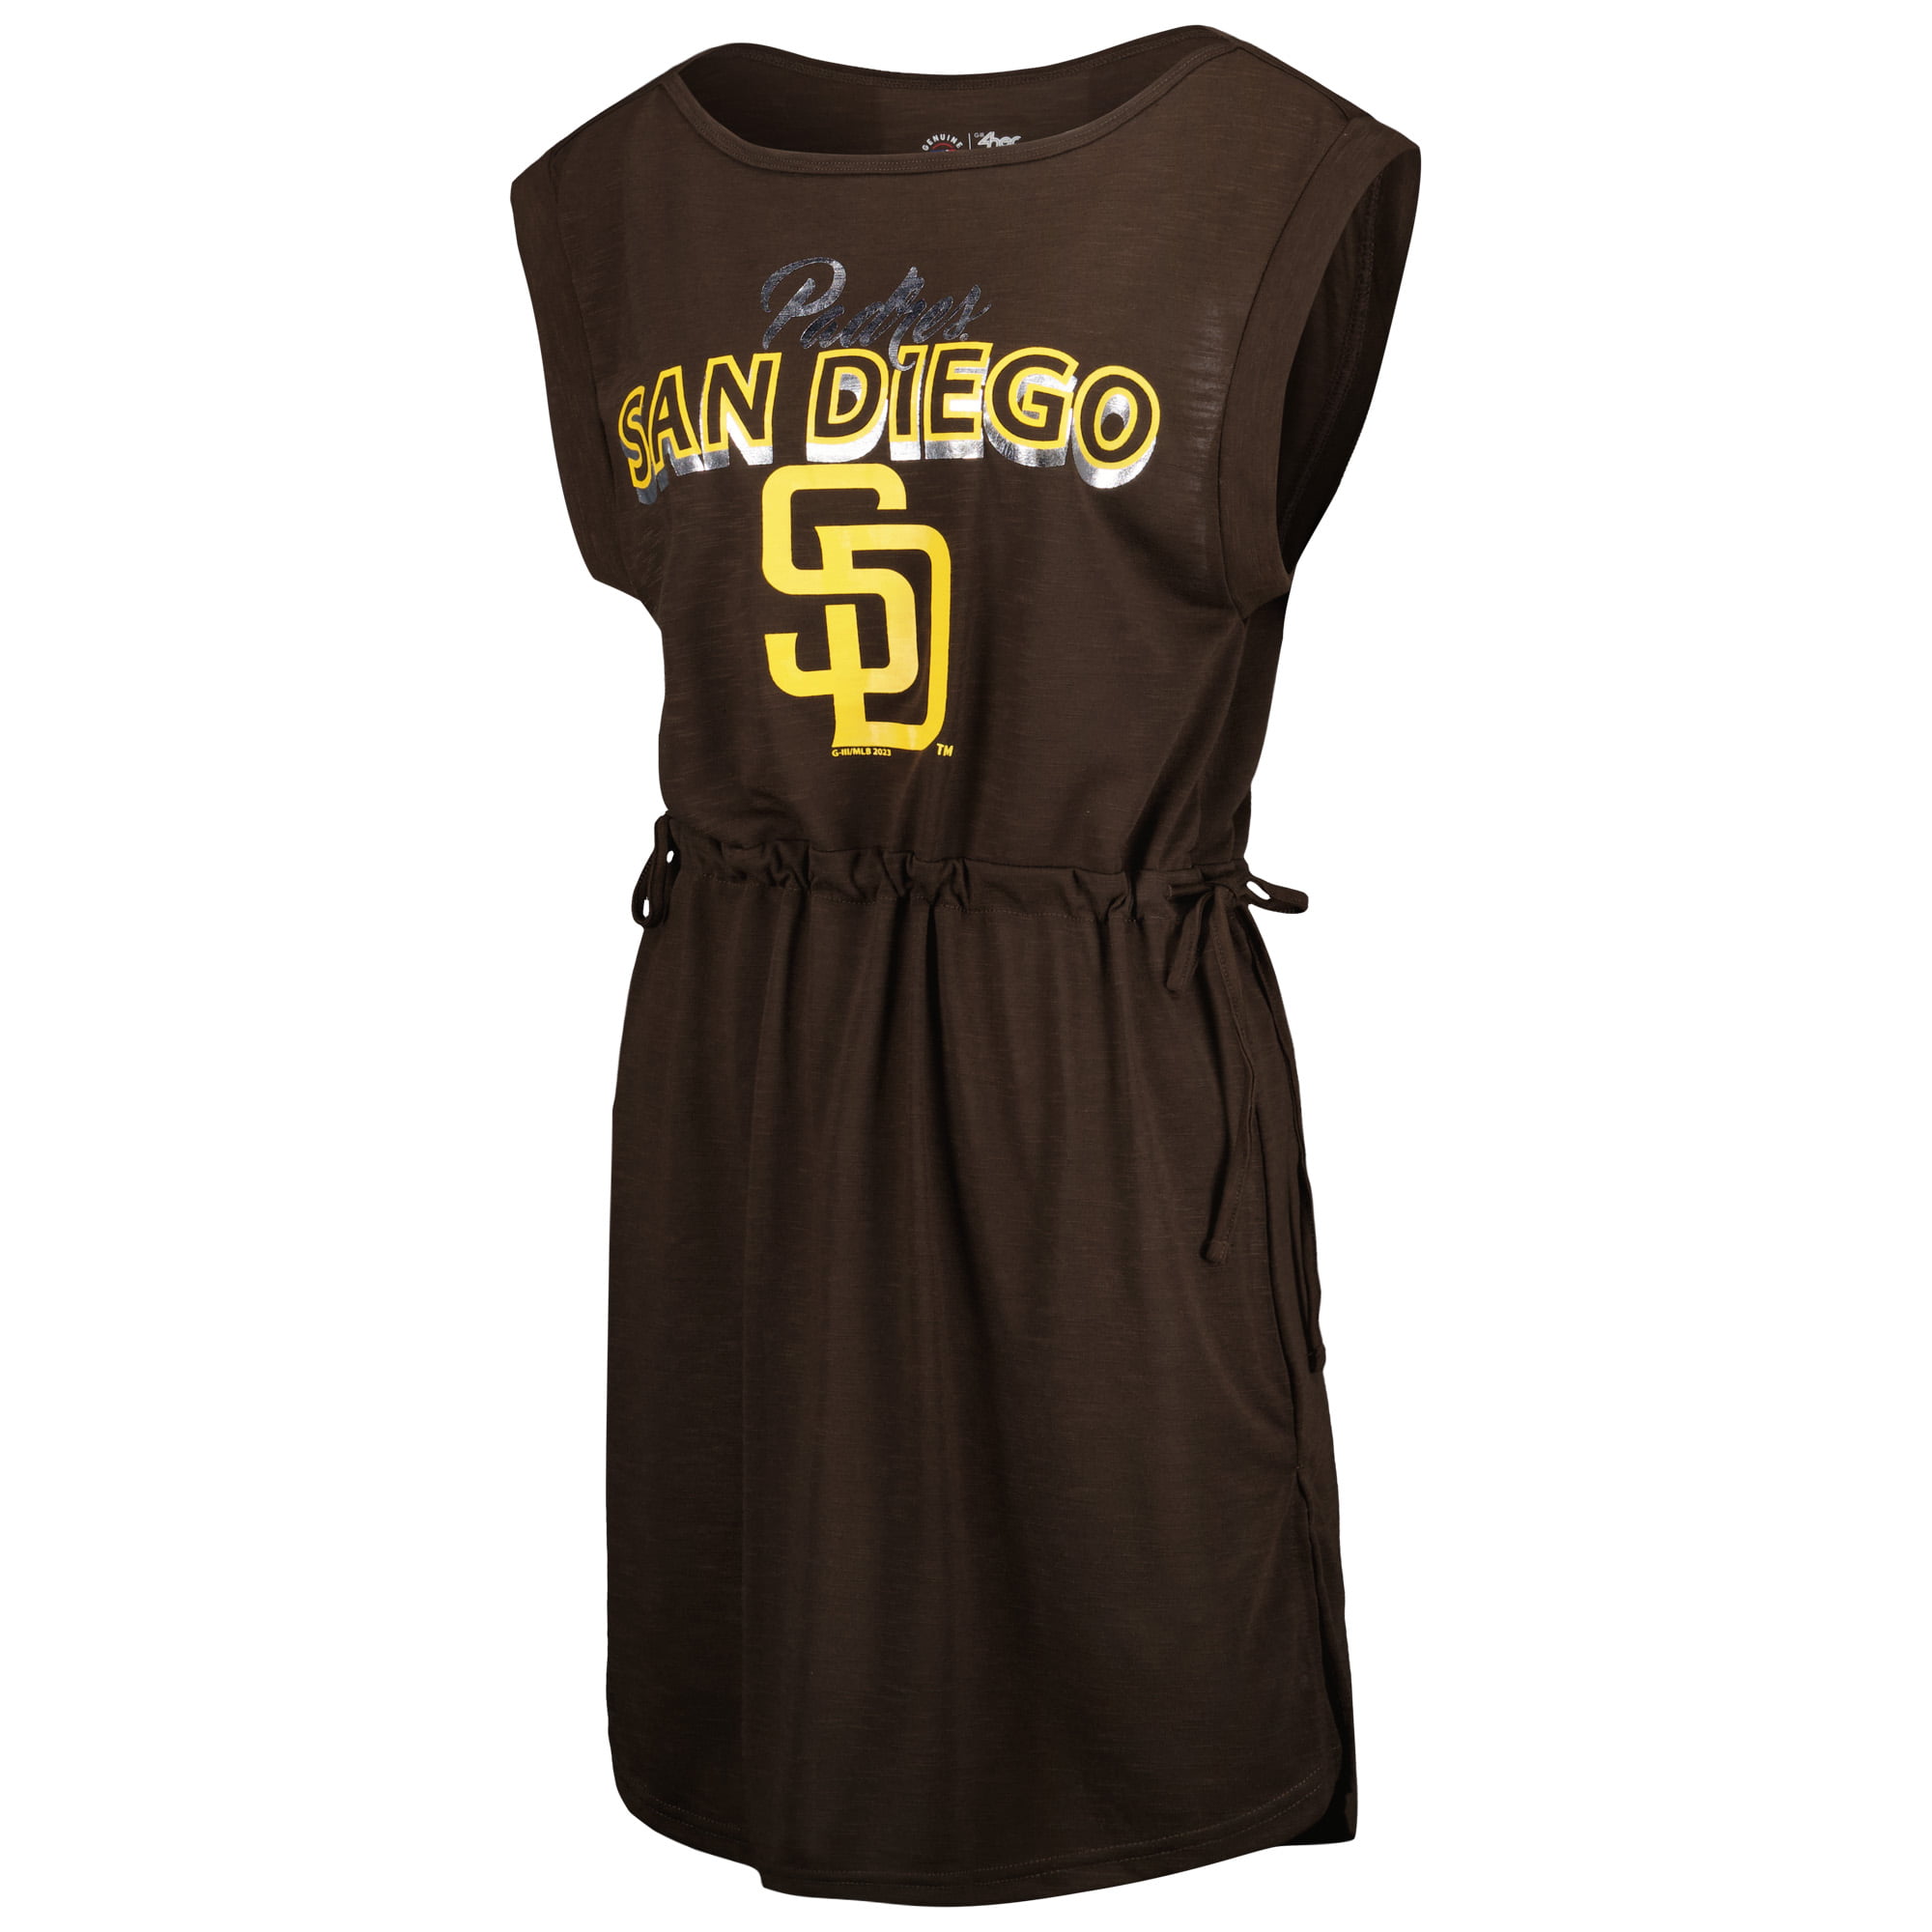 San Diego Padres Women's Apparel, Padres Womens Jerseys, Clothing